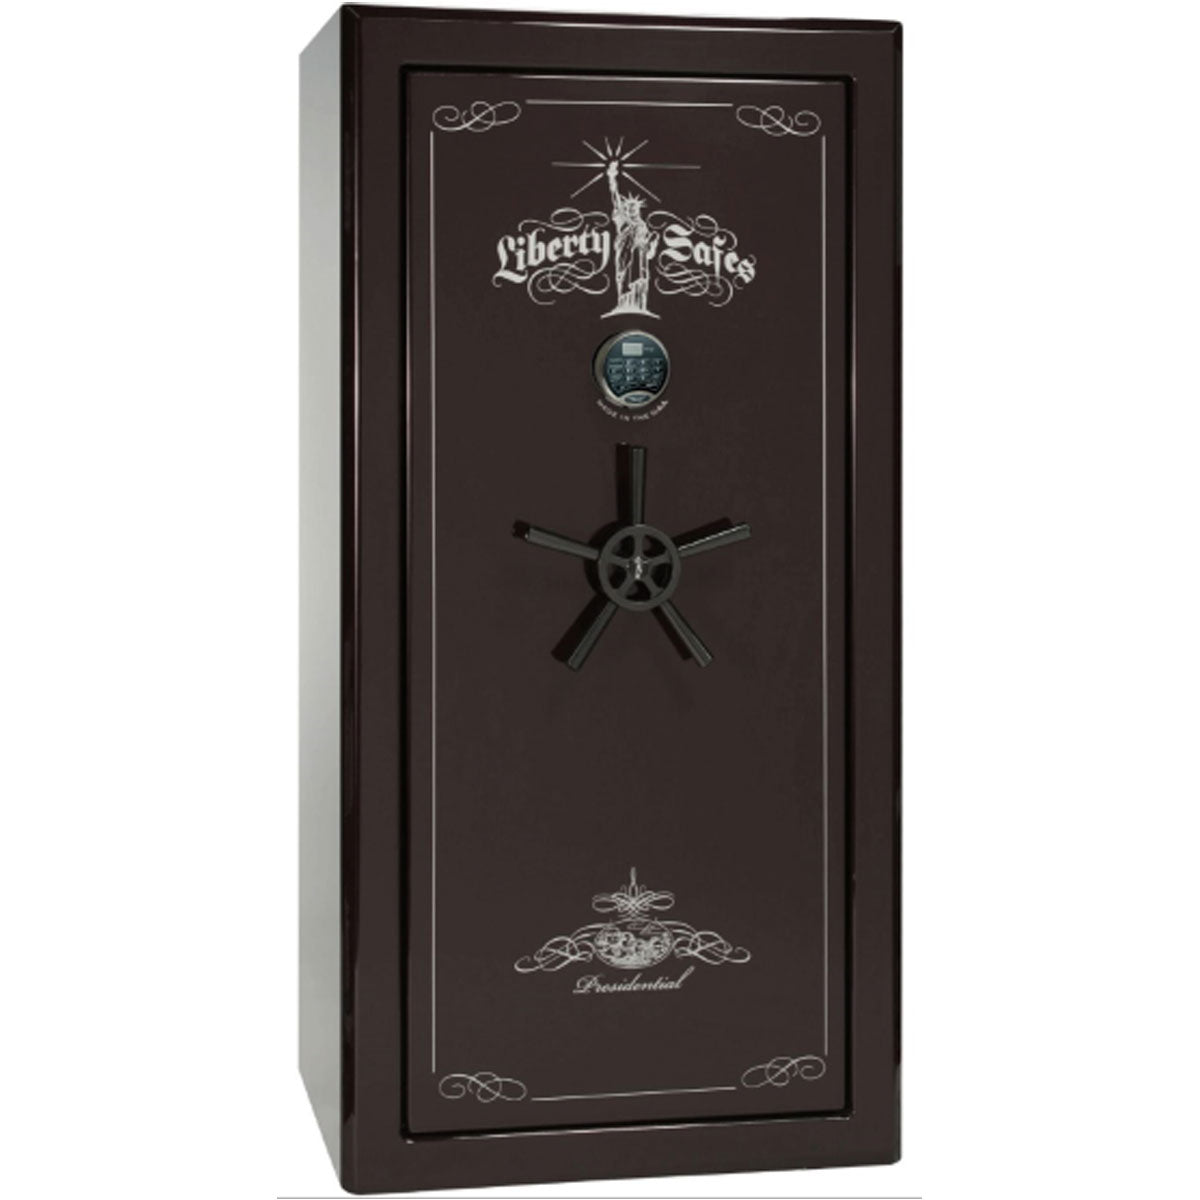 Liberty Safe Presidential 25 in Black Cherry Gloss with Black Chrome Electronic Lock, closed door.